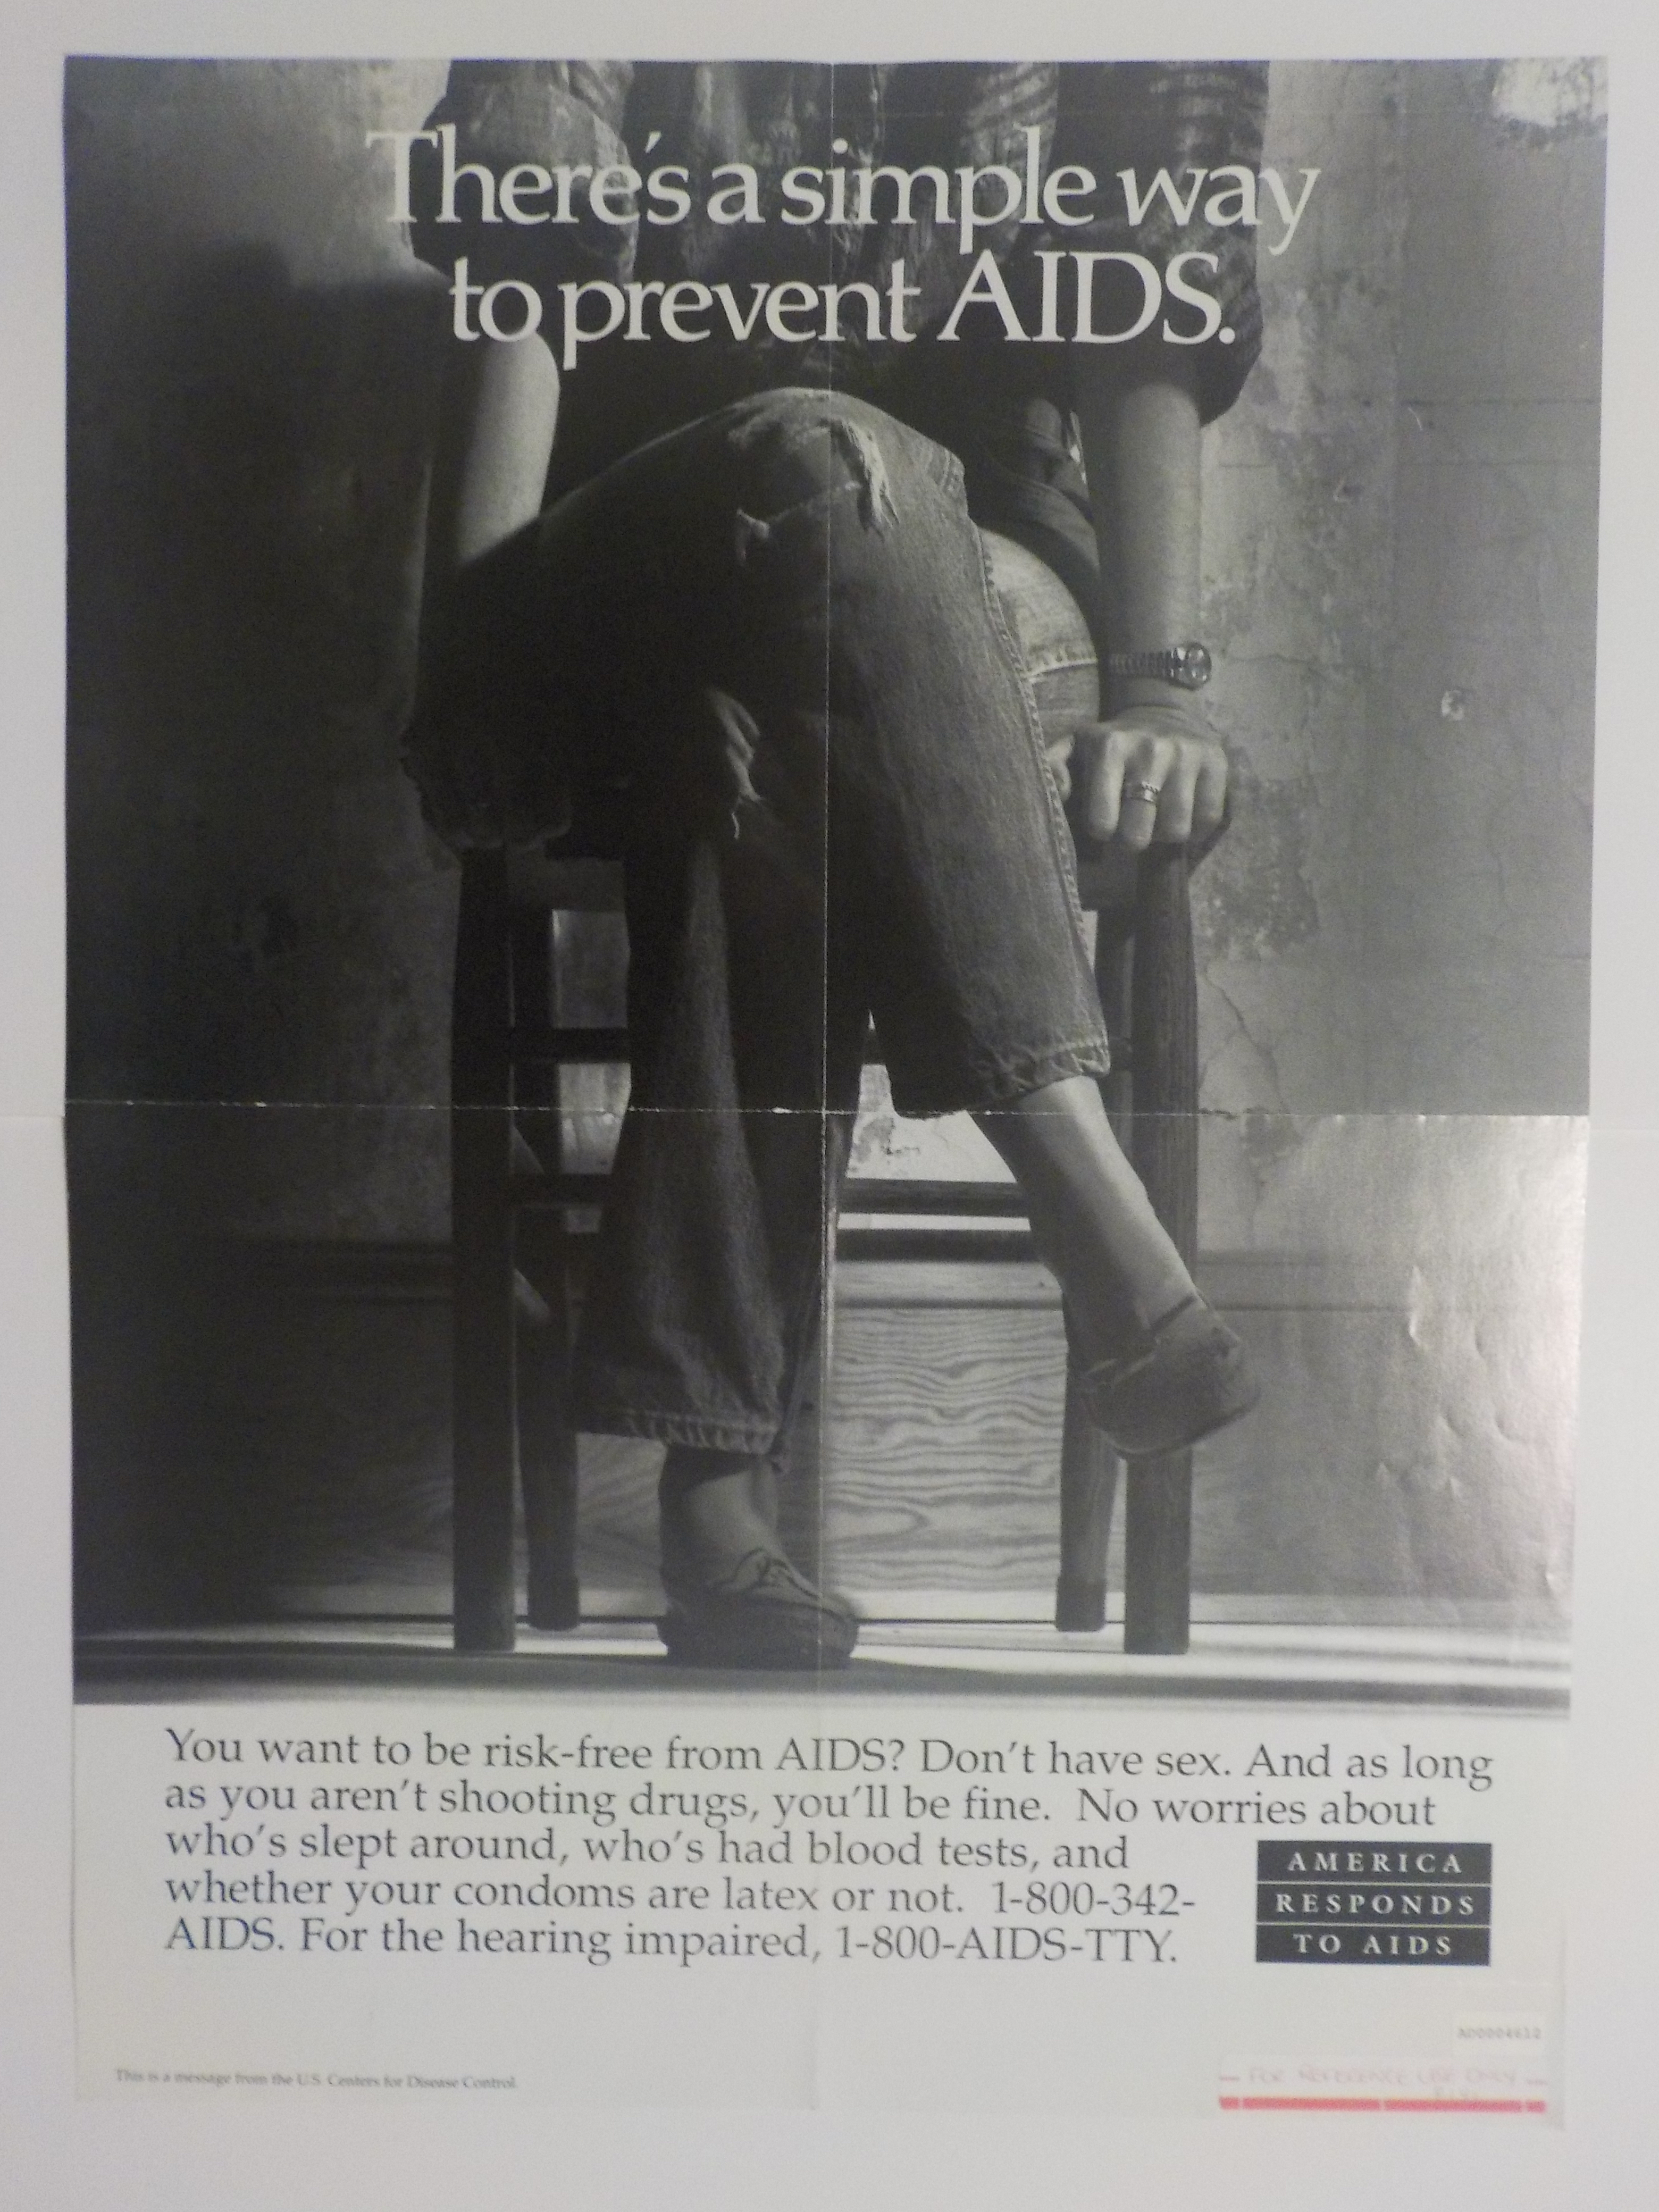 There’s a simple way to prevent AIDS